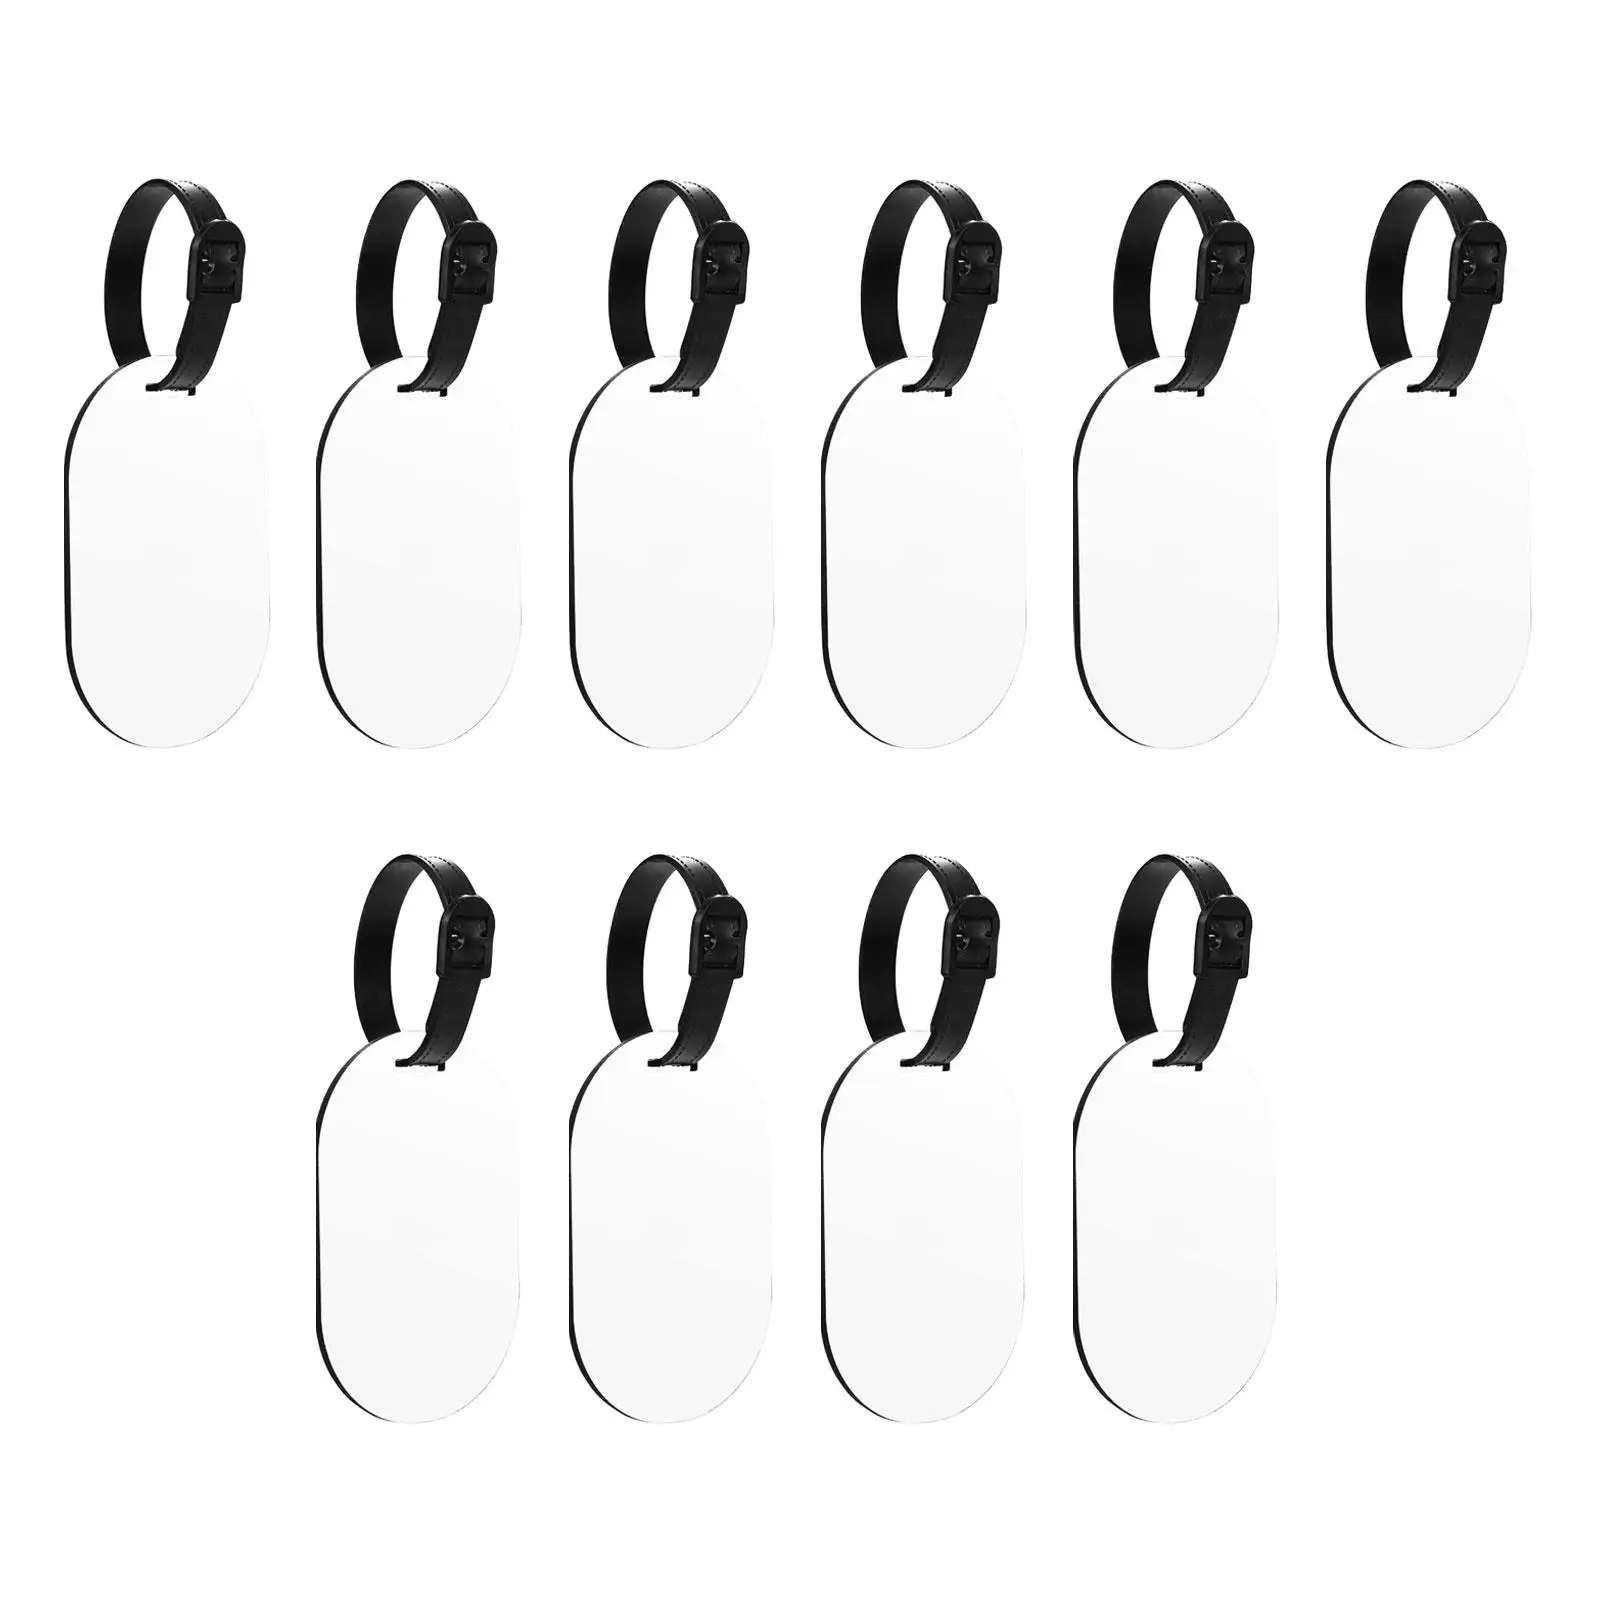 10x Sublimation Blank Luggage Tags Keychain with Straps Luggage Tags for DIY Printing Identification Labels Car Seat